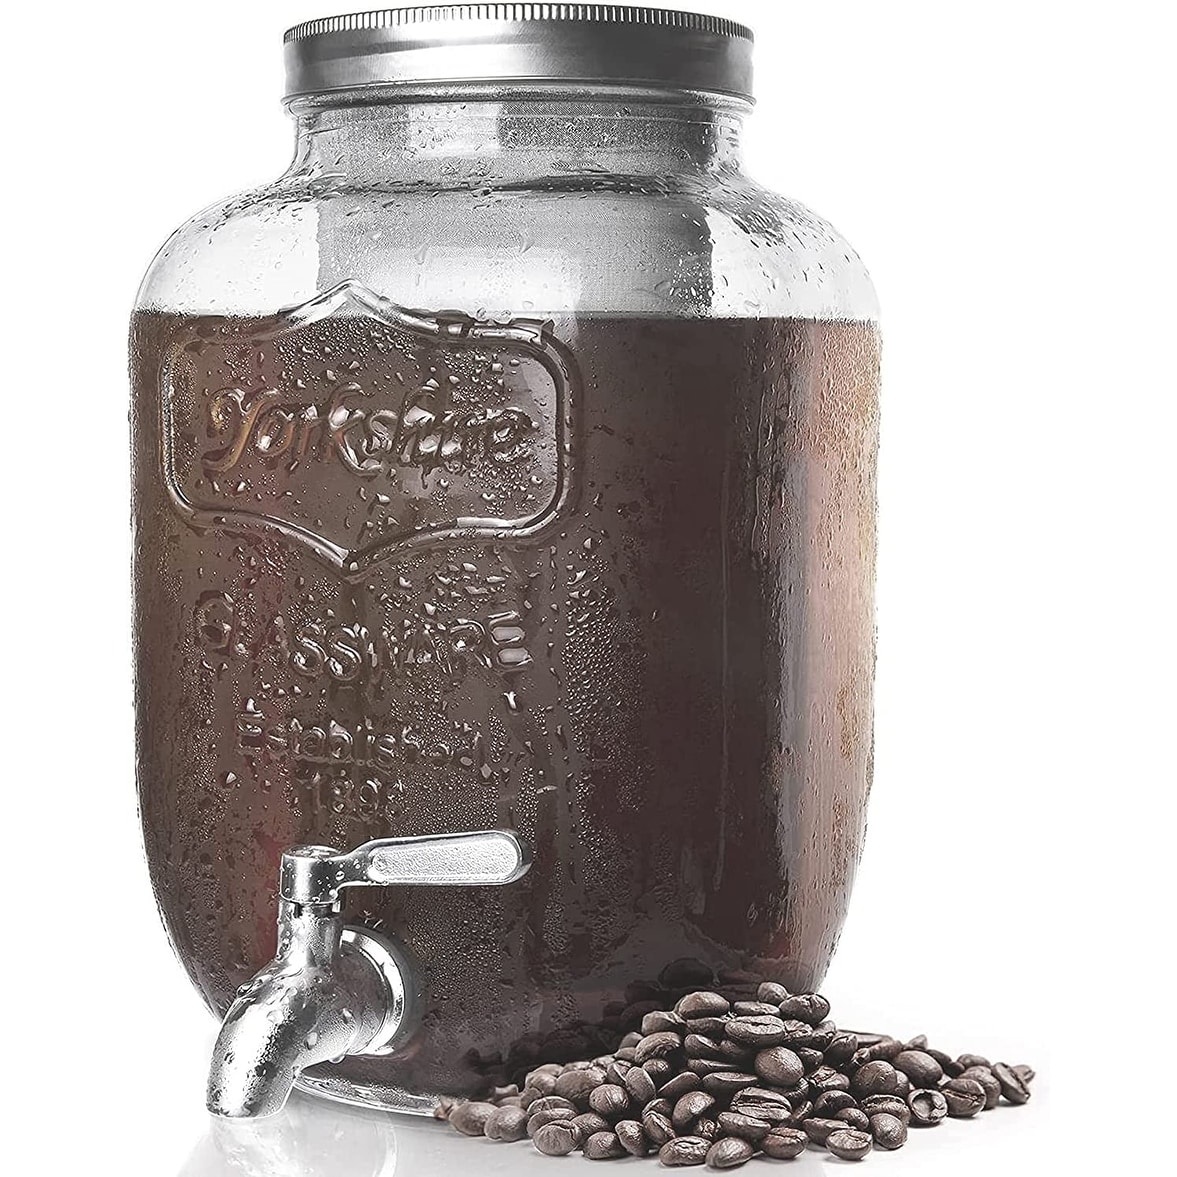 Stainless Steel Mason Jar Cold Brew Coffee Maker and Iced Tea Infuser Loose  Leaf Tea Mesh